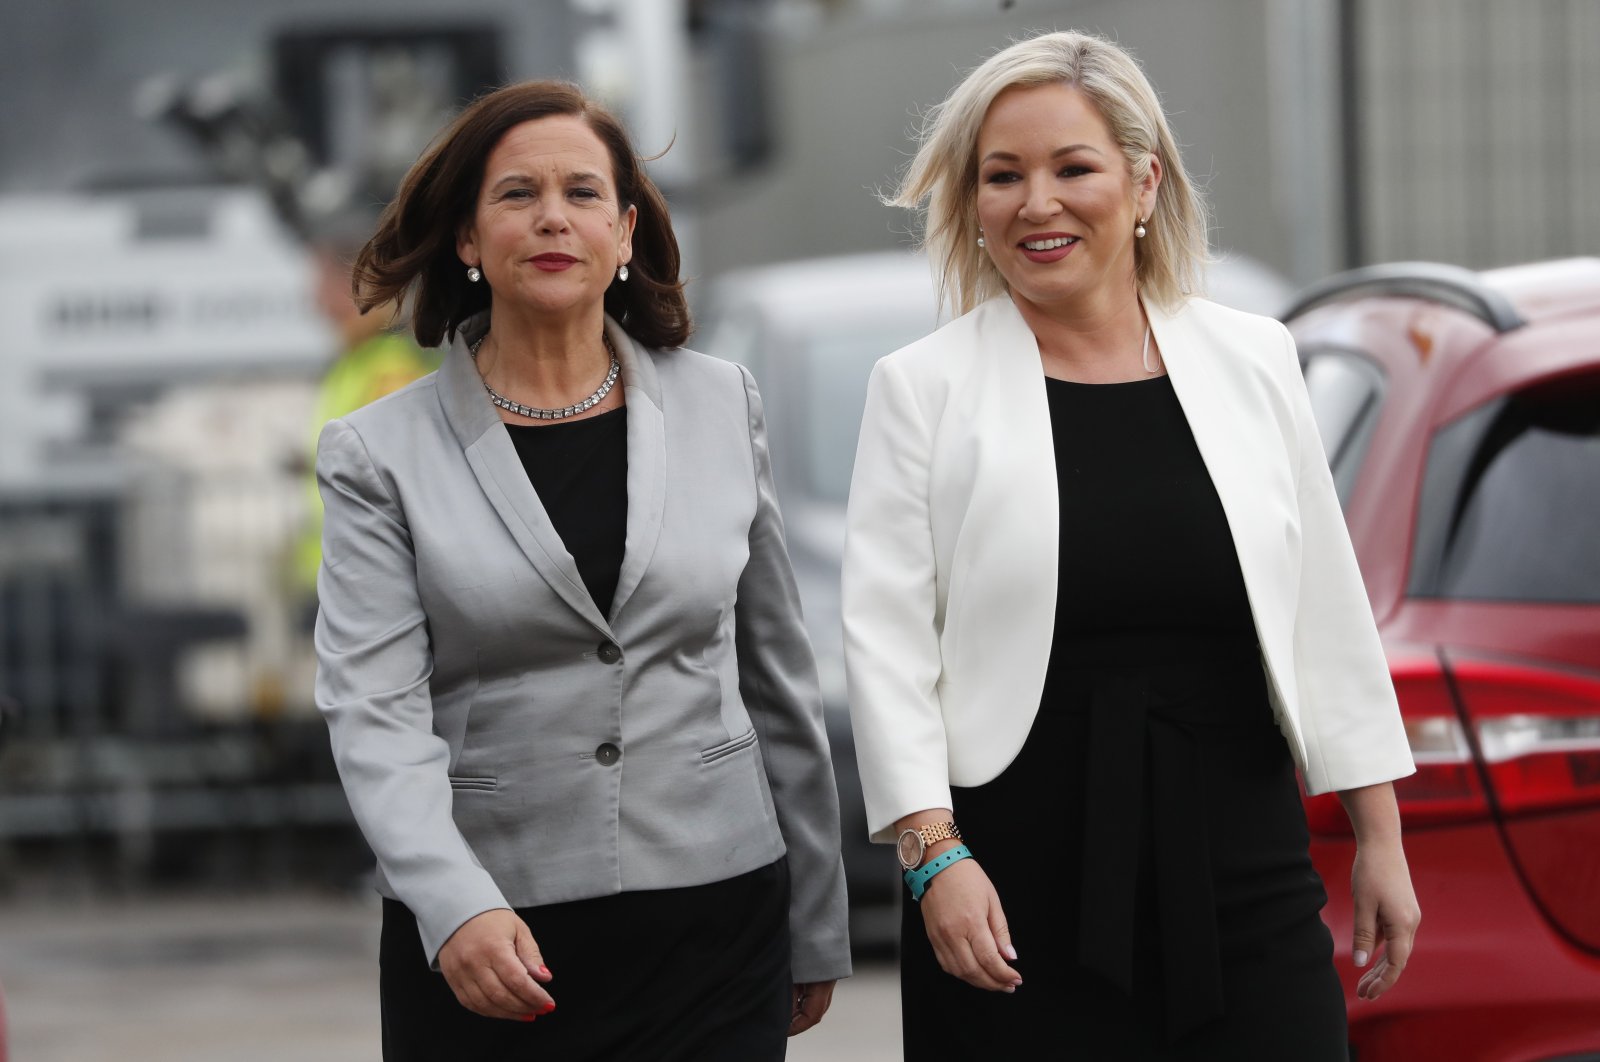 Sinn Fein leader Mary Lou McDonald, left, and Deputy leader Michelle O&#039;Neill arrive at the election count center in Belfast, Northern Ireland Counting is continuing across Northern Ireland in the Assembly elections. (AP Photo)